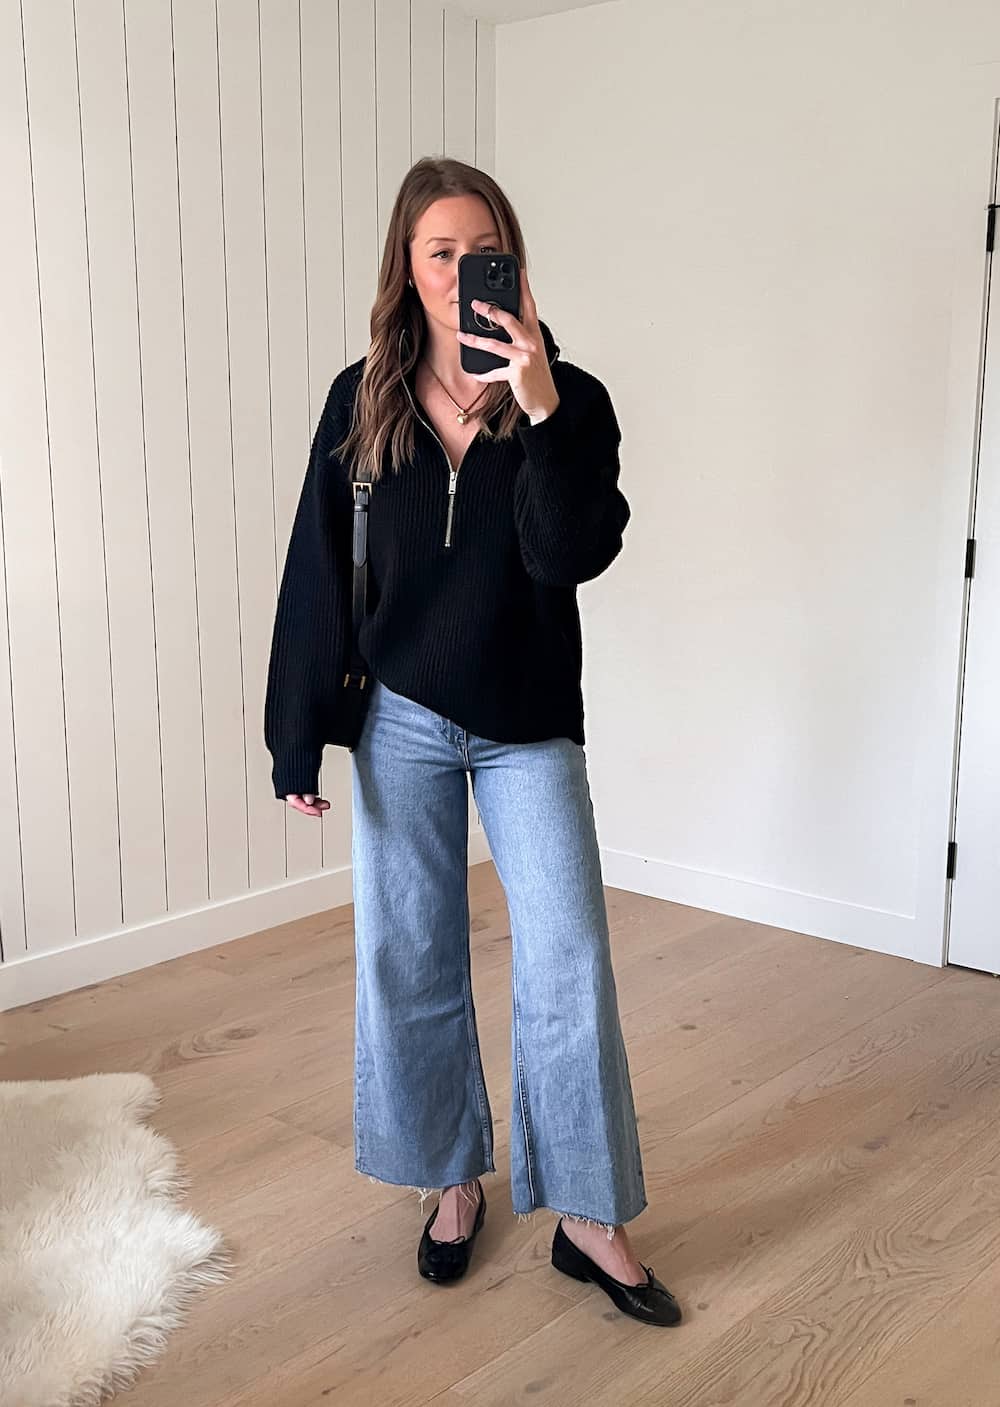 Christal wearing an outfit with a black half-zip sweater and wide-leg jeans from Mango with black ballet flats as an idea for a capsule wardrobe outfit